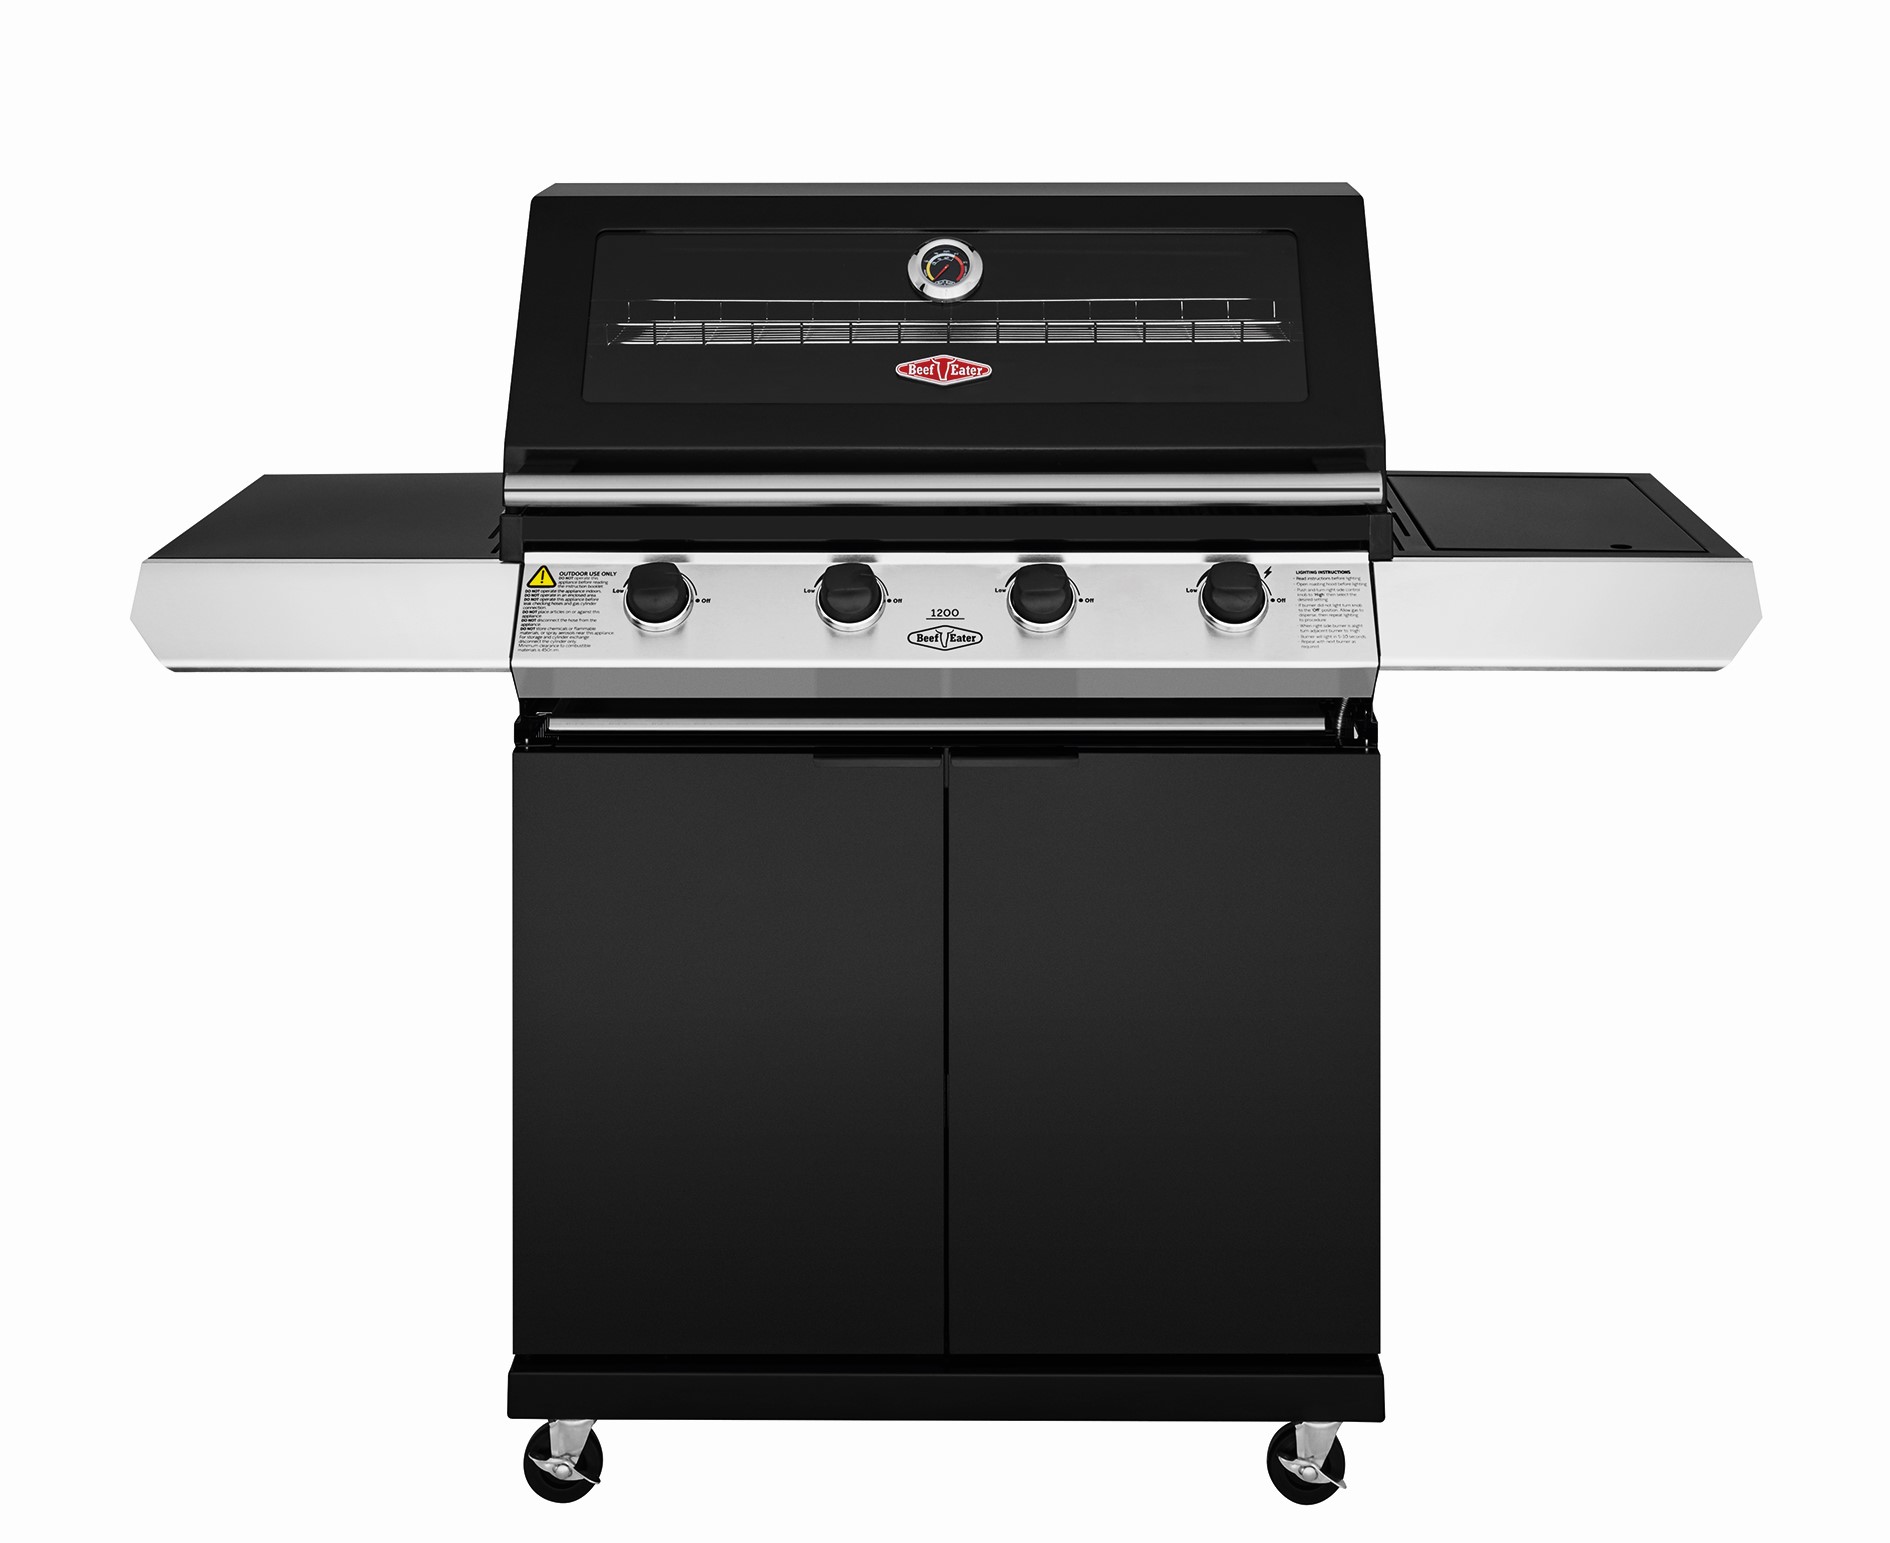 make seo meta description of Bayside Bbqs and Outdoor Centre with keyword: L)FFSET SMOKER COVER BEEFEATER 1200 4 BURNER BLACK WITH SIDE BURNER